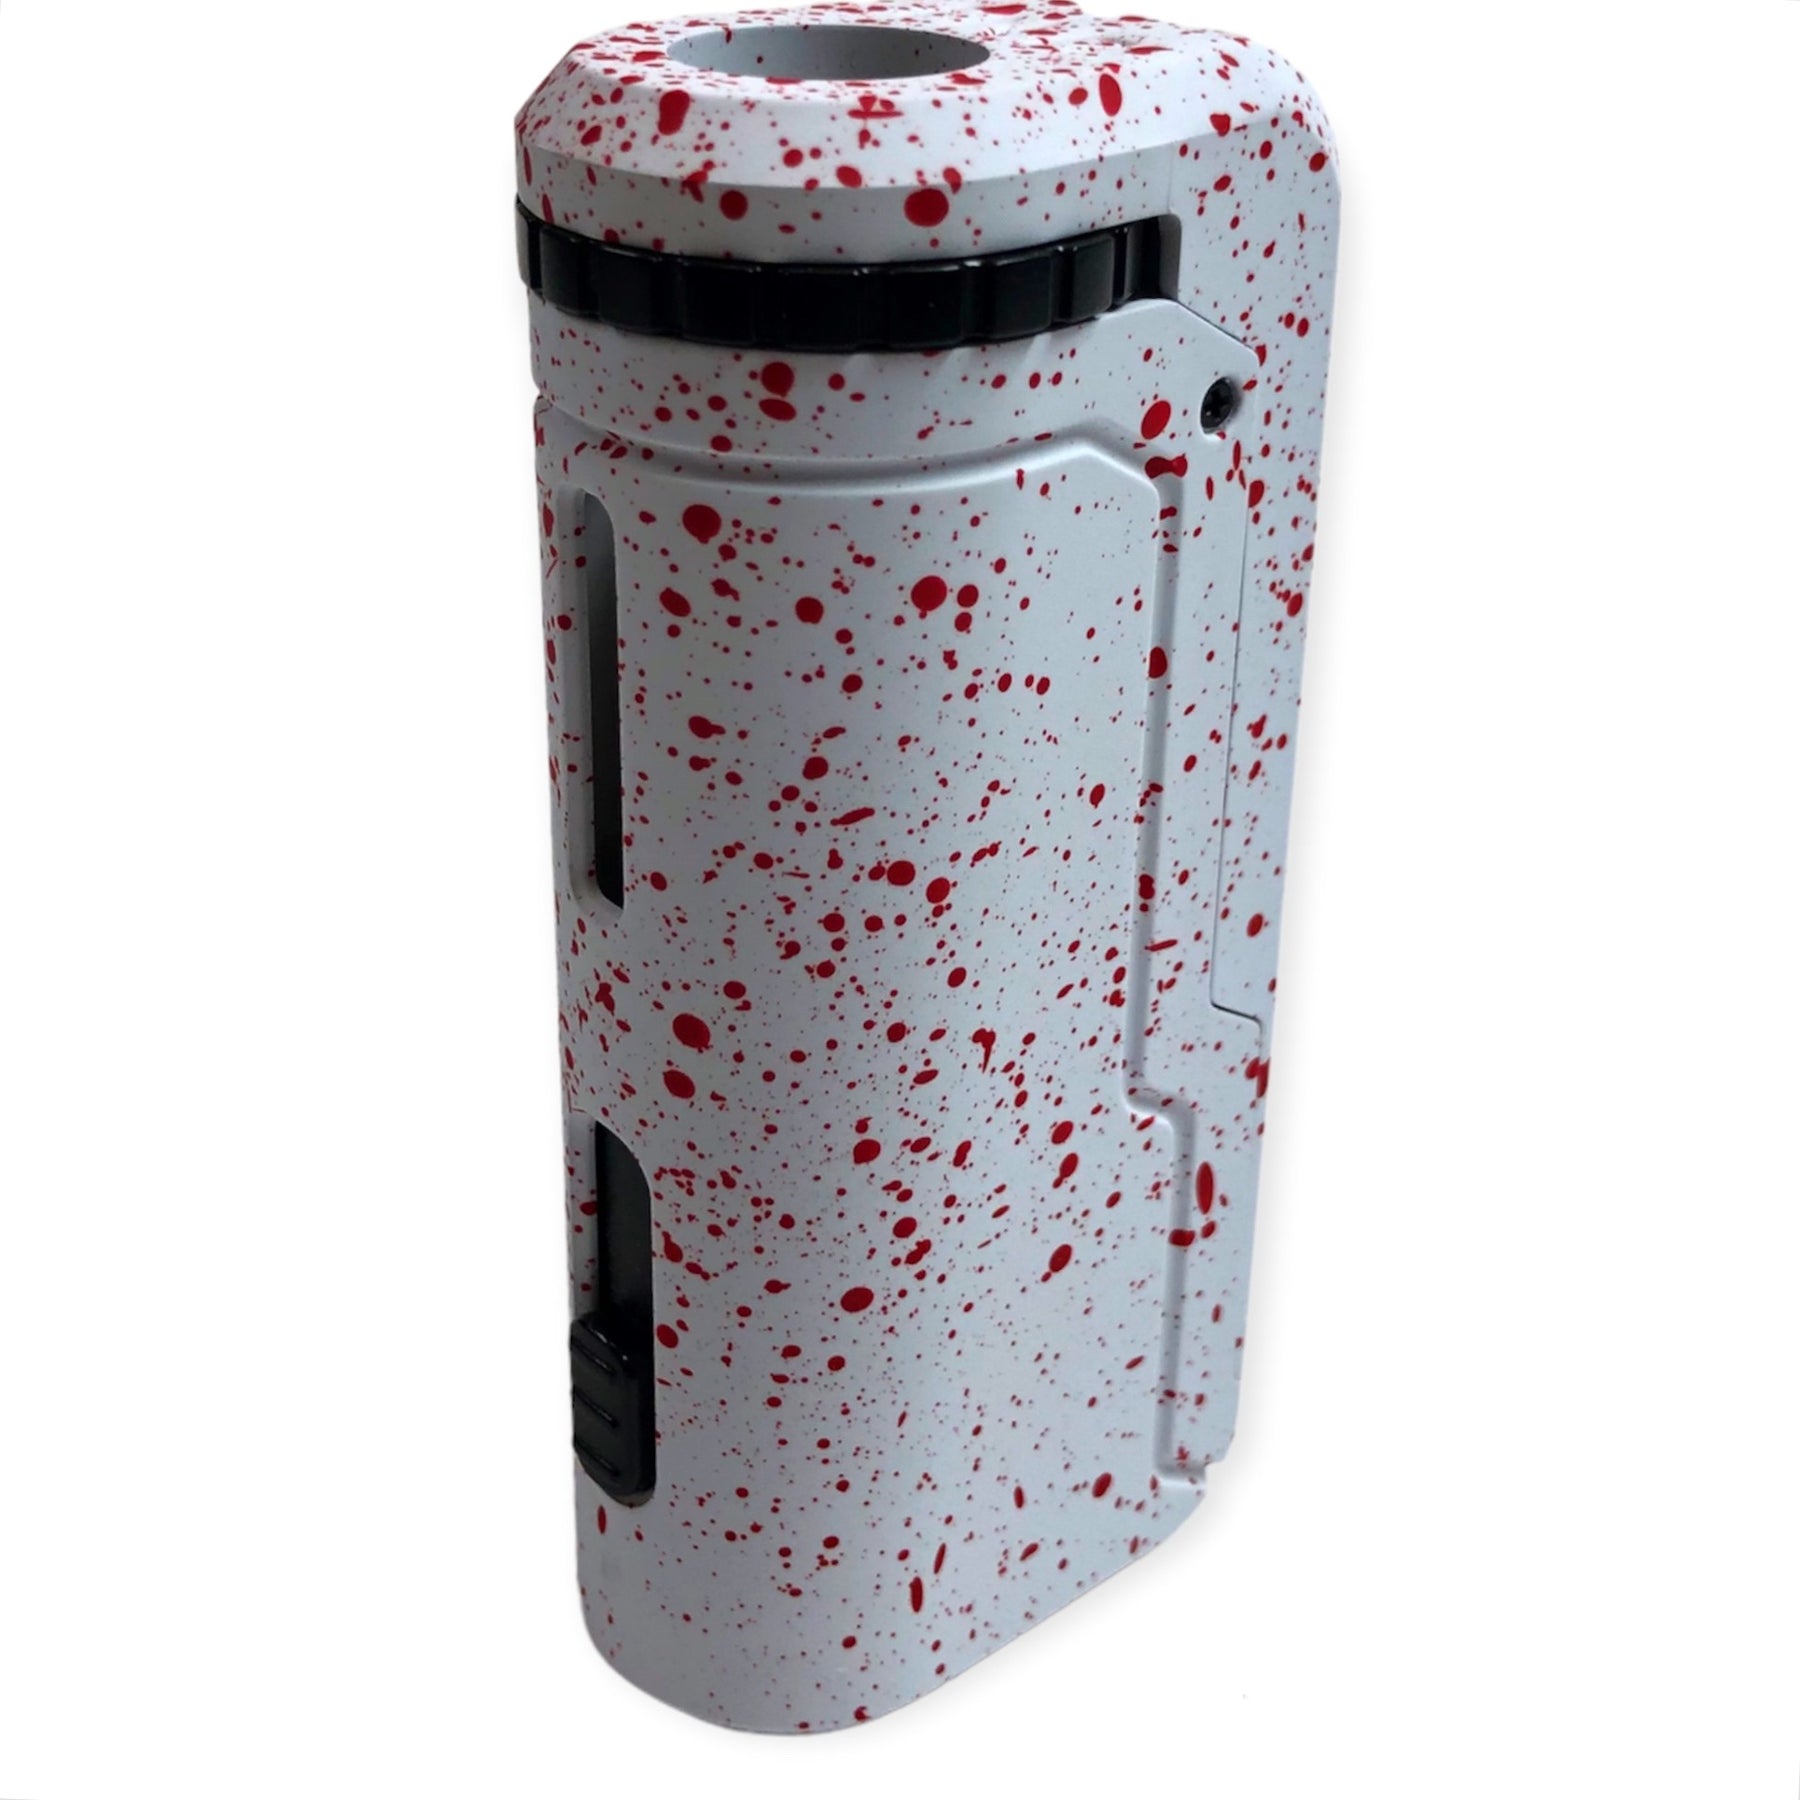 Wulf Uni Adjustable Cartridge Vape Color White and Red Dots